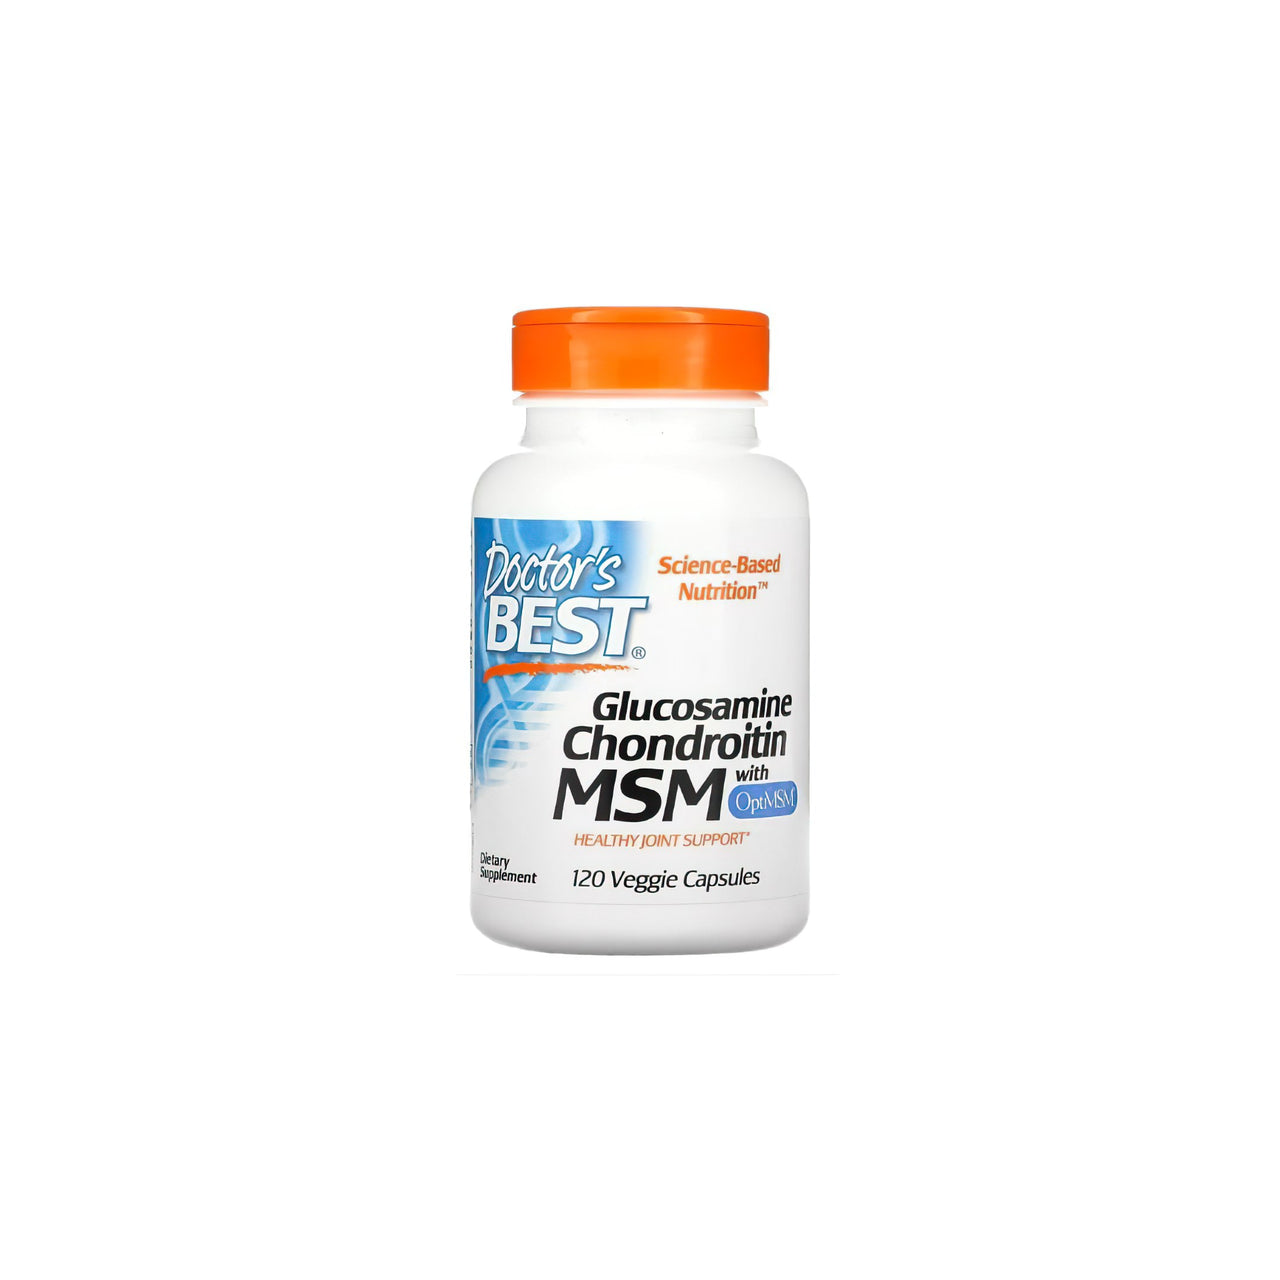 The world's best Doctor's Best Glucosamine Chondroitin MSM 120 capsules.